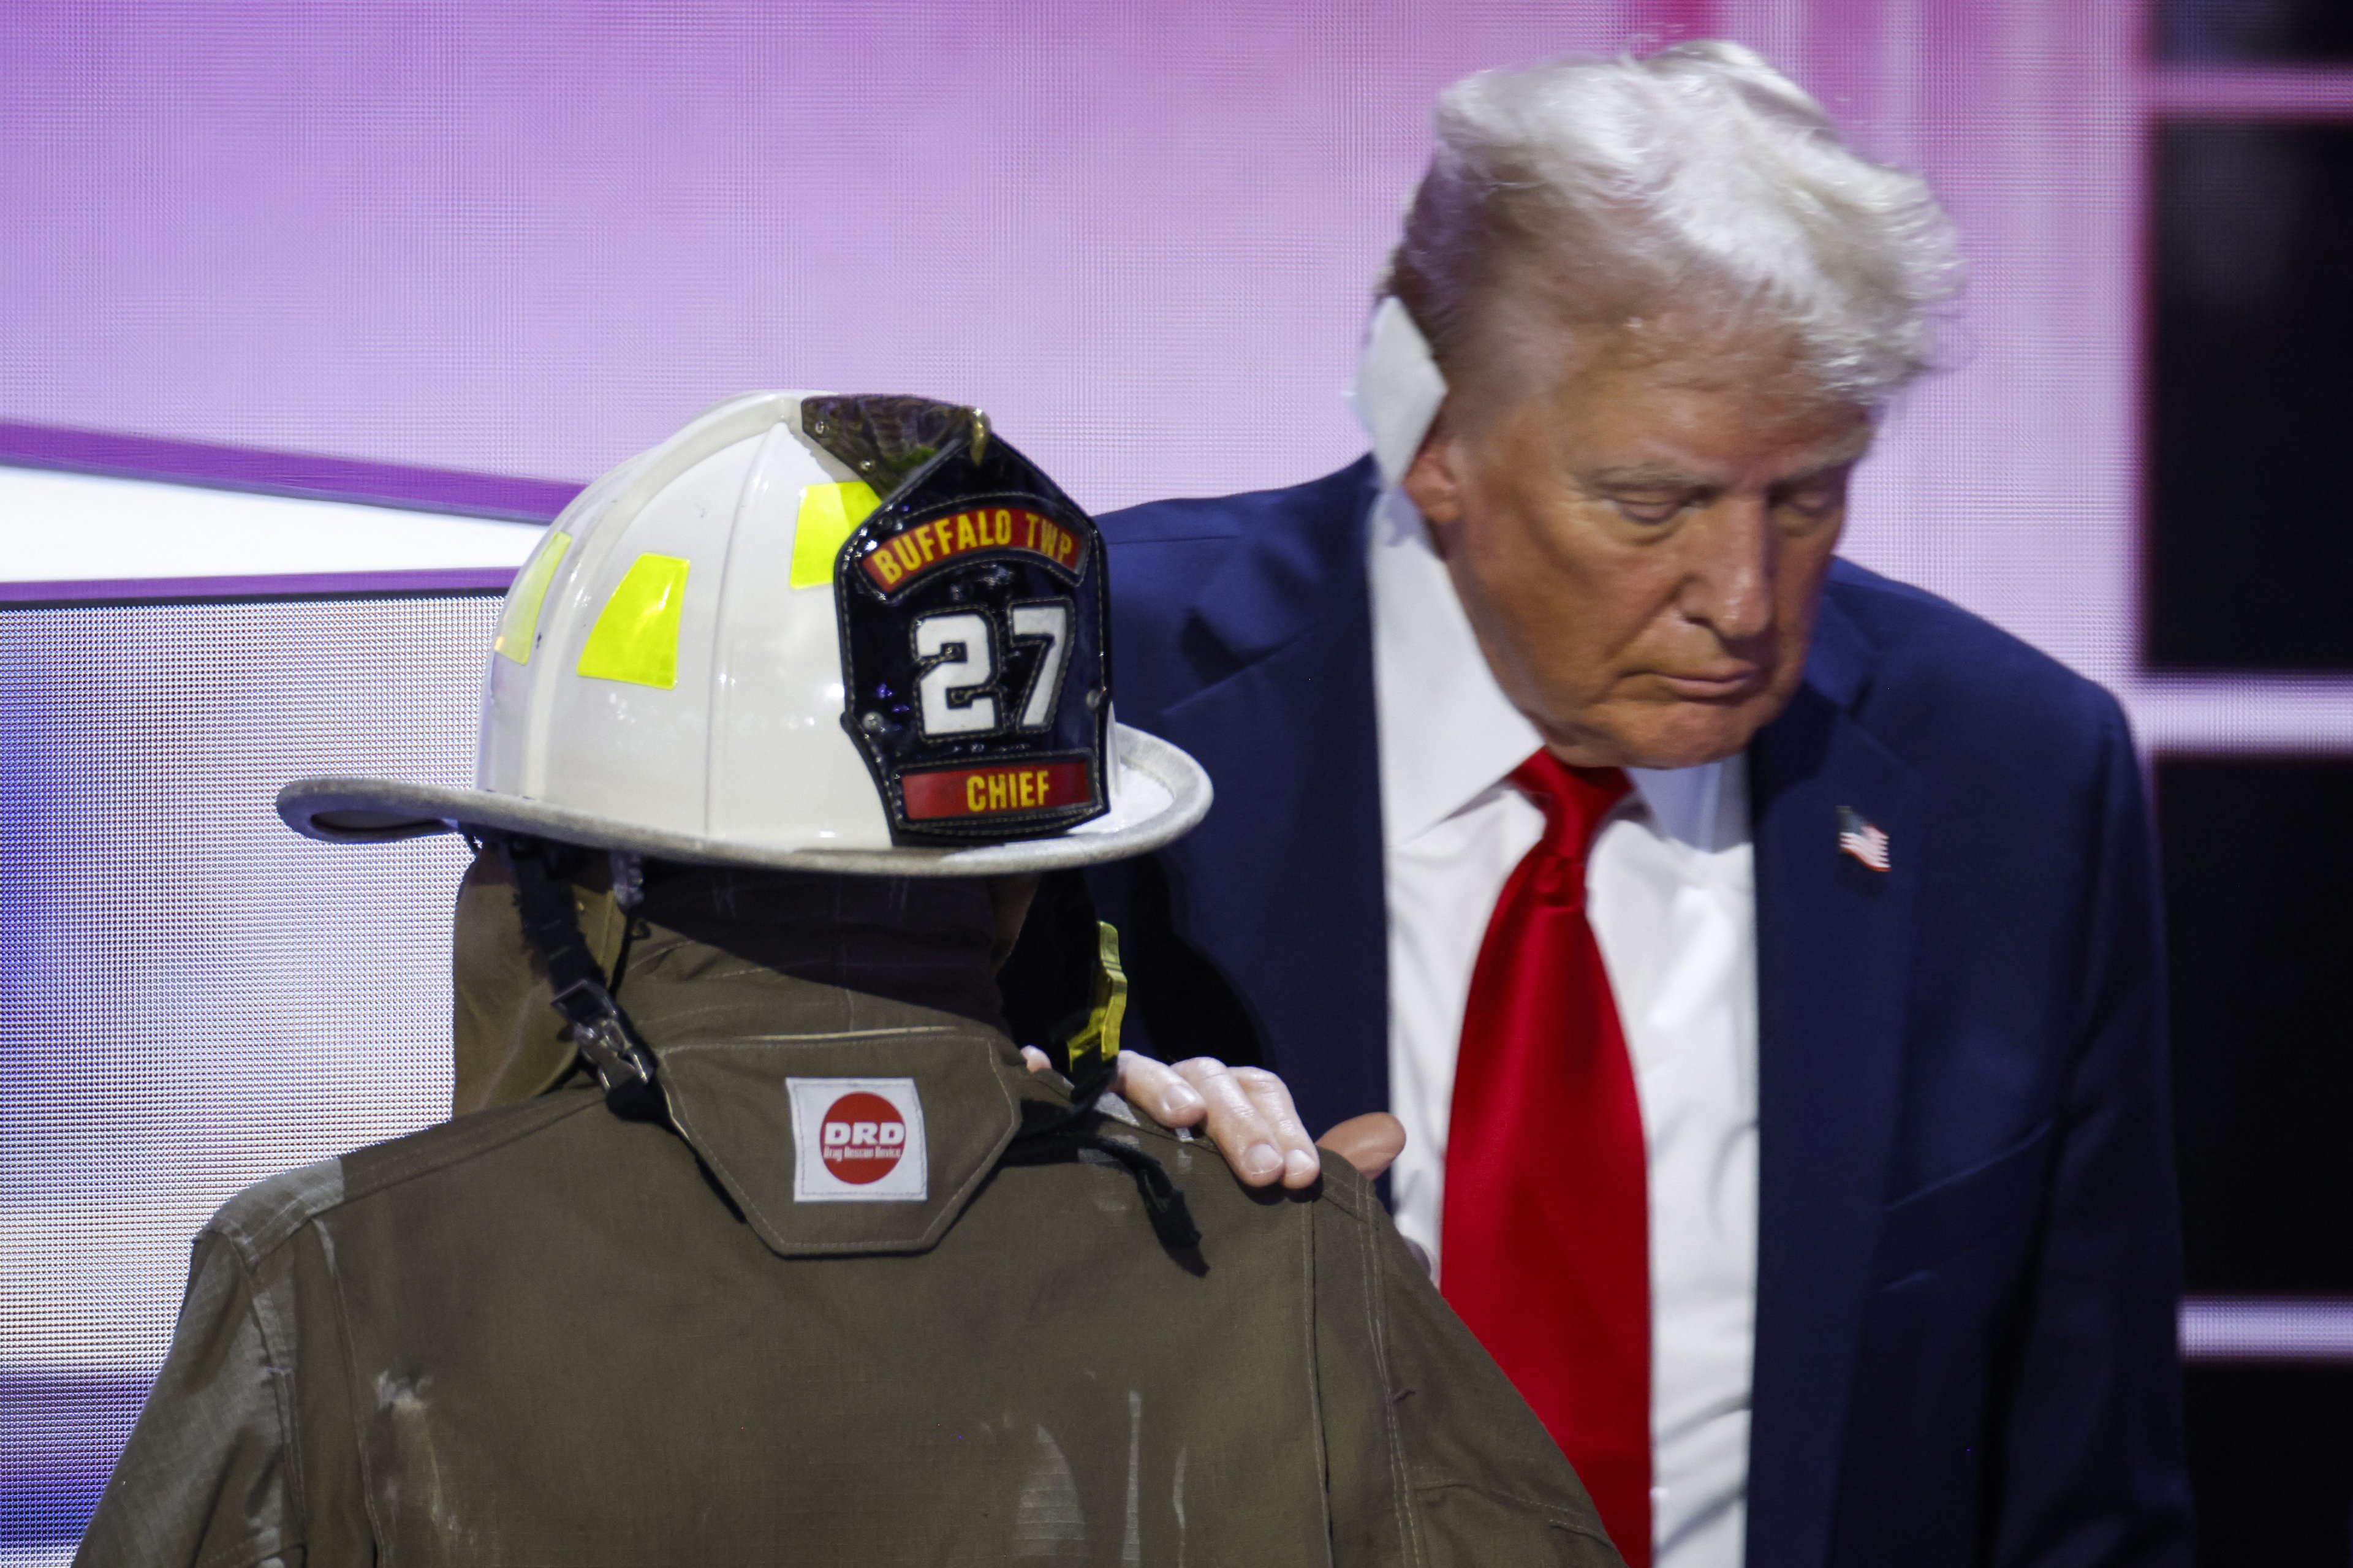 MILWAUKEE, WISCONSIN - JULY 18: Republican presidential nominee, former U.S. President Donald Trump embraces the firefighter uniform of Corey Comperatore as he speaks on stage on the fourth day of the Republican National Convention at the Fiserv Forum on July 18, 2024 in Milwaukee, Wisconsin. Delegates, politicians, and the Republican faithful are in Milwaukee for the annual convention, concluding with former President Donald Trump accepting his party's presidential nomination. The RNC takes place from July 15-18.   Chip Somodevilla/Getty Images/AFP (Photo by CHIP SOMODEVILLA / GETTY IMAGES NORTH AMERICA / Getty Images via AFP)